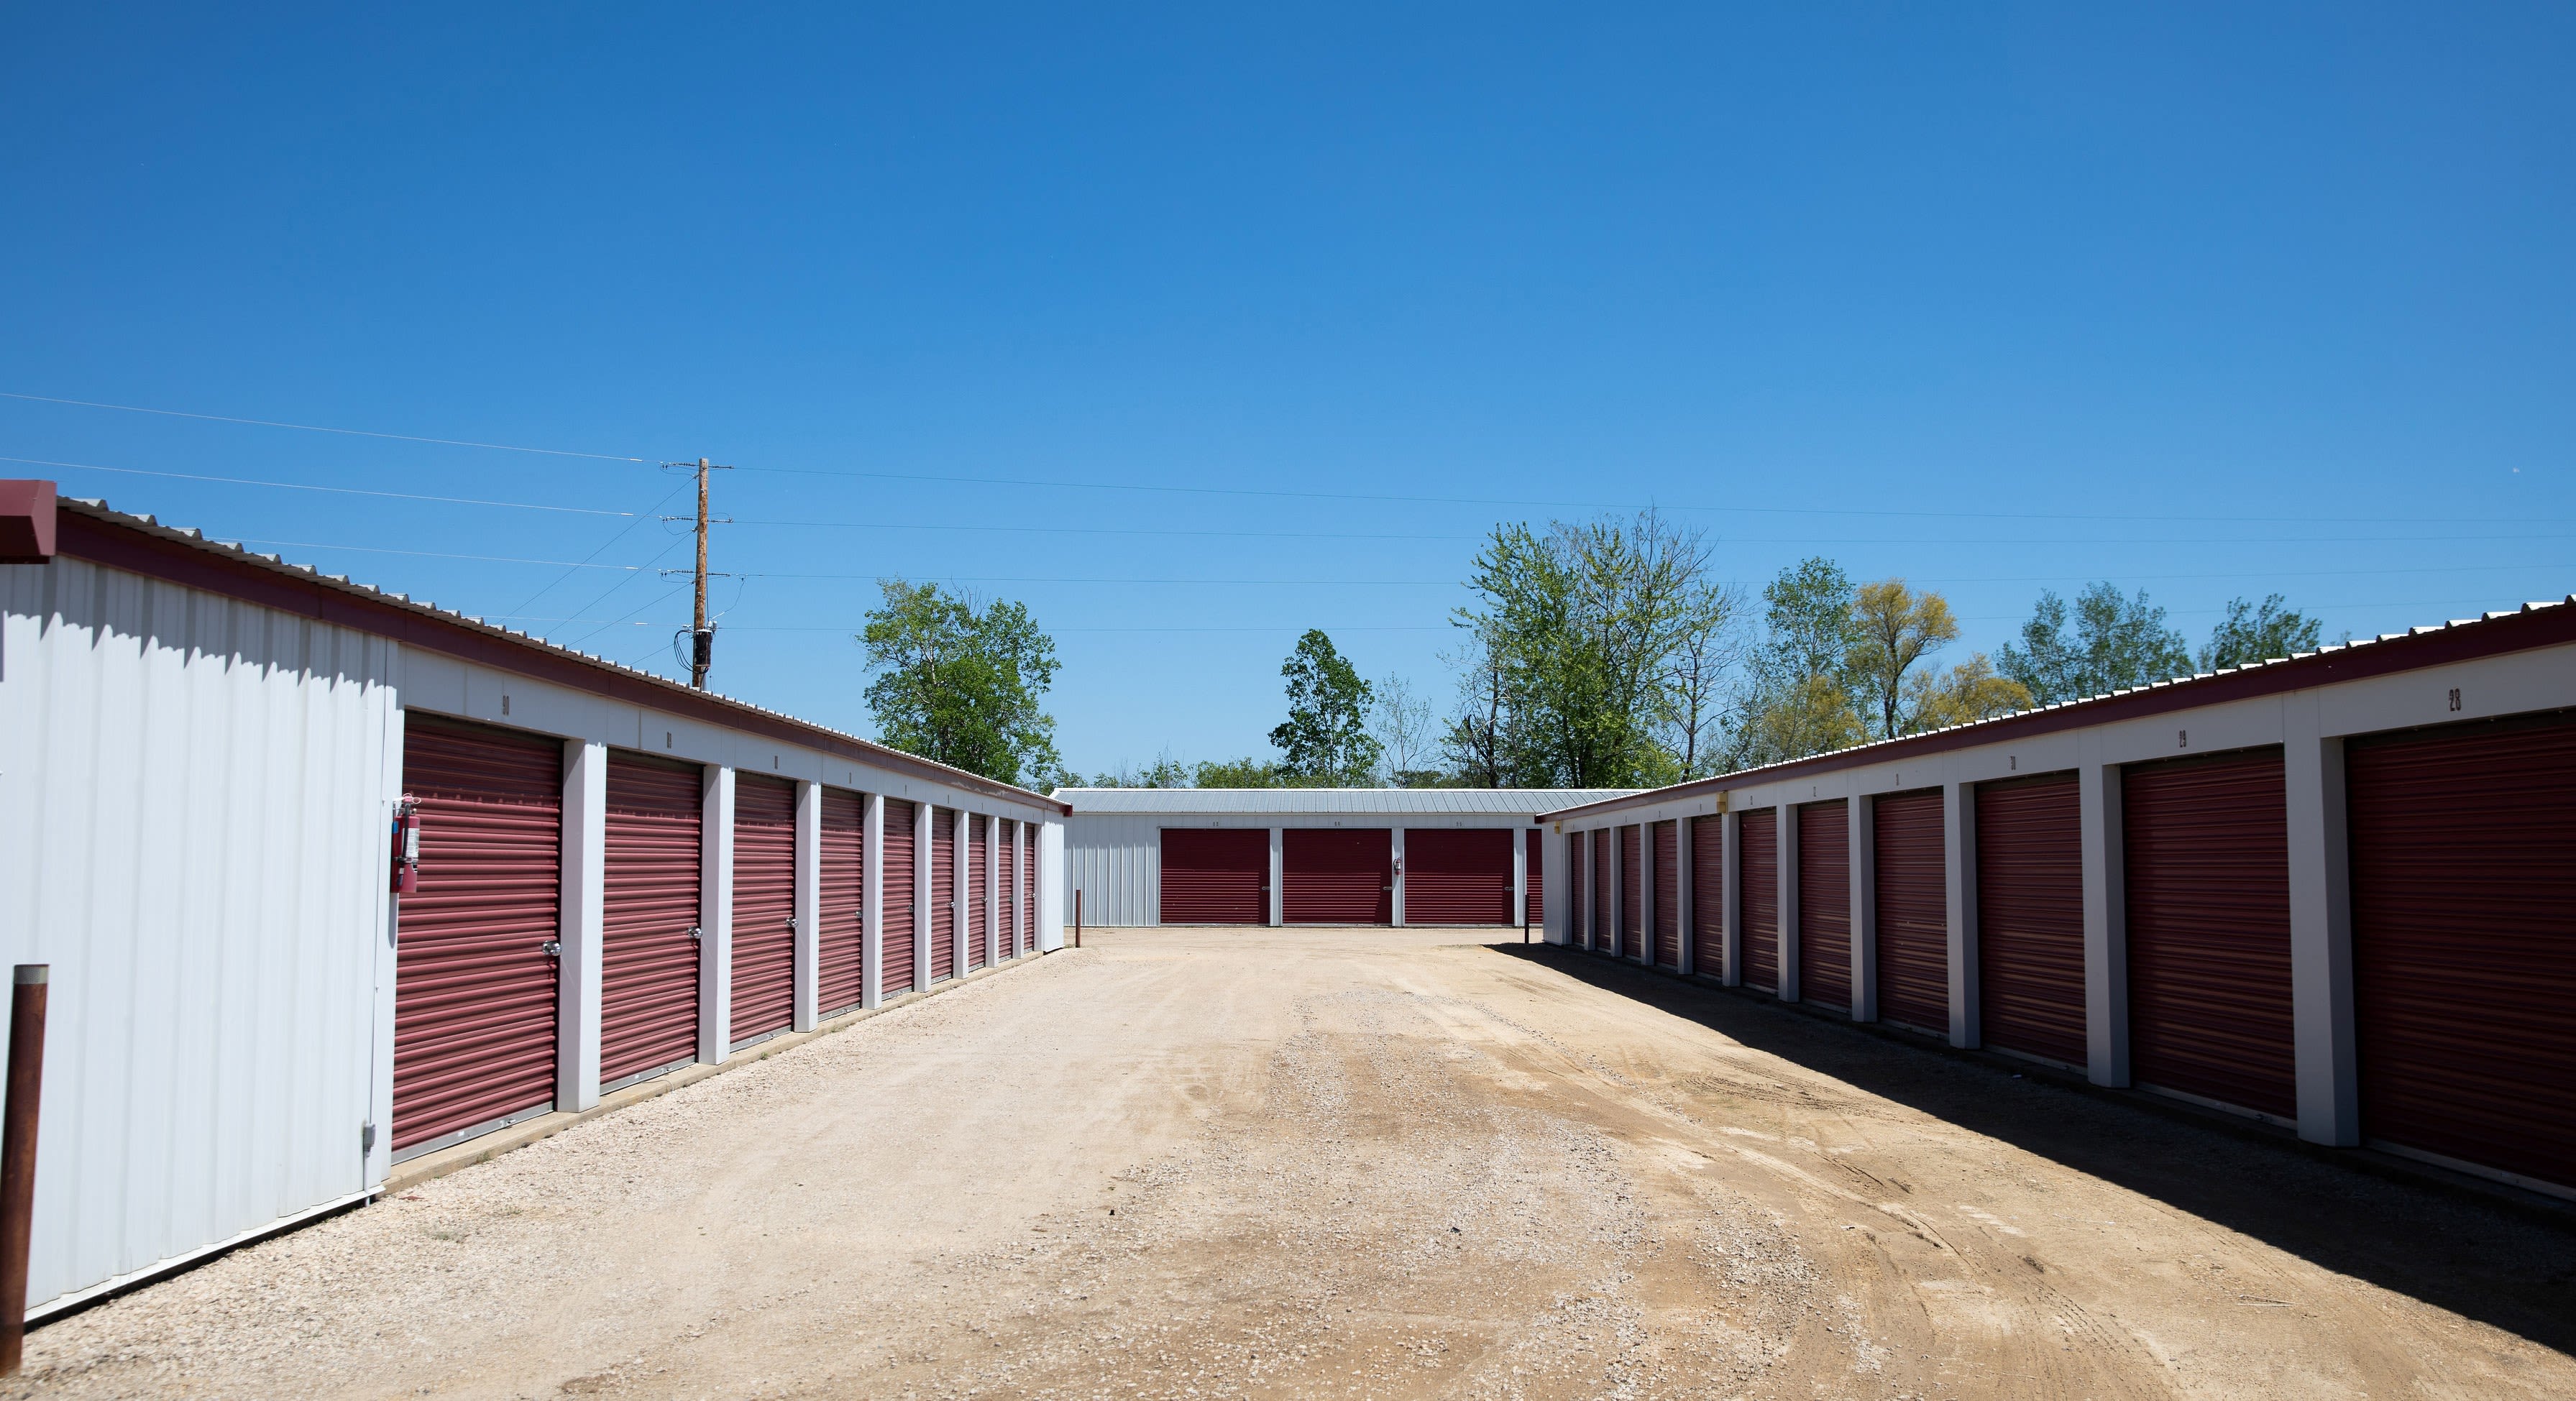 Features at KO Storage in Tomah, Wisconsin